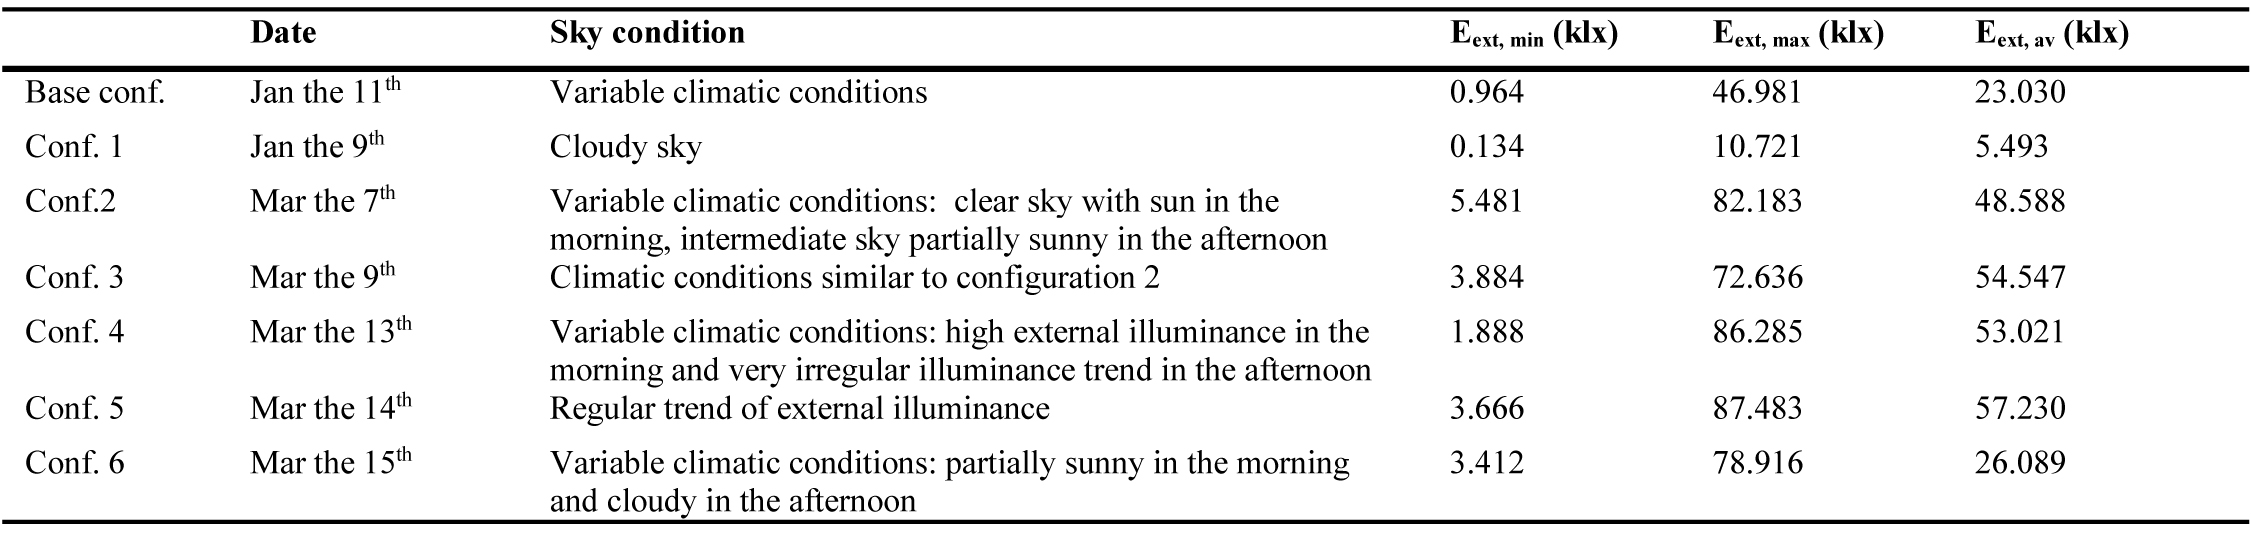 Date, sky conditions, maximum, minimum and average values of external illuminance for each test.